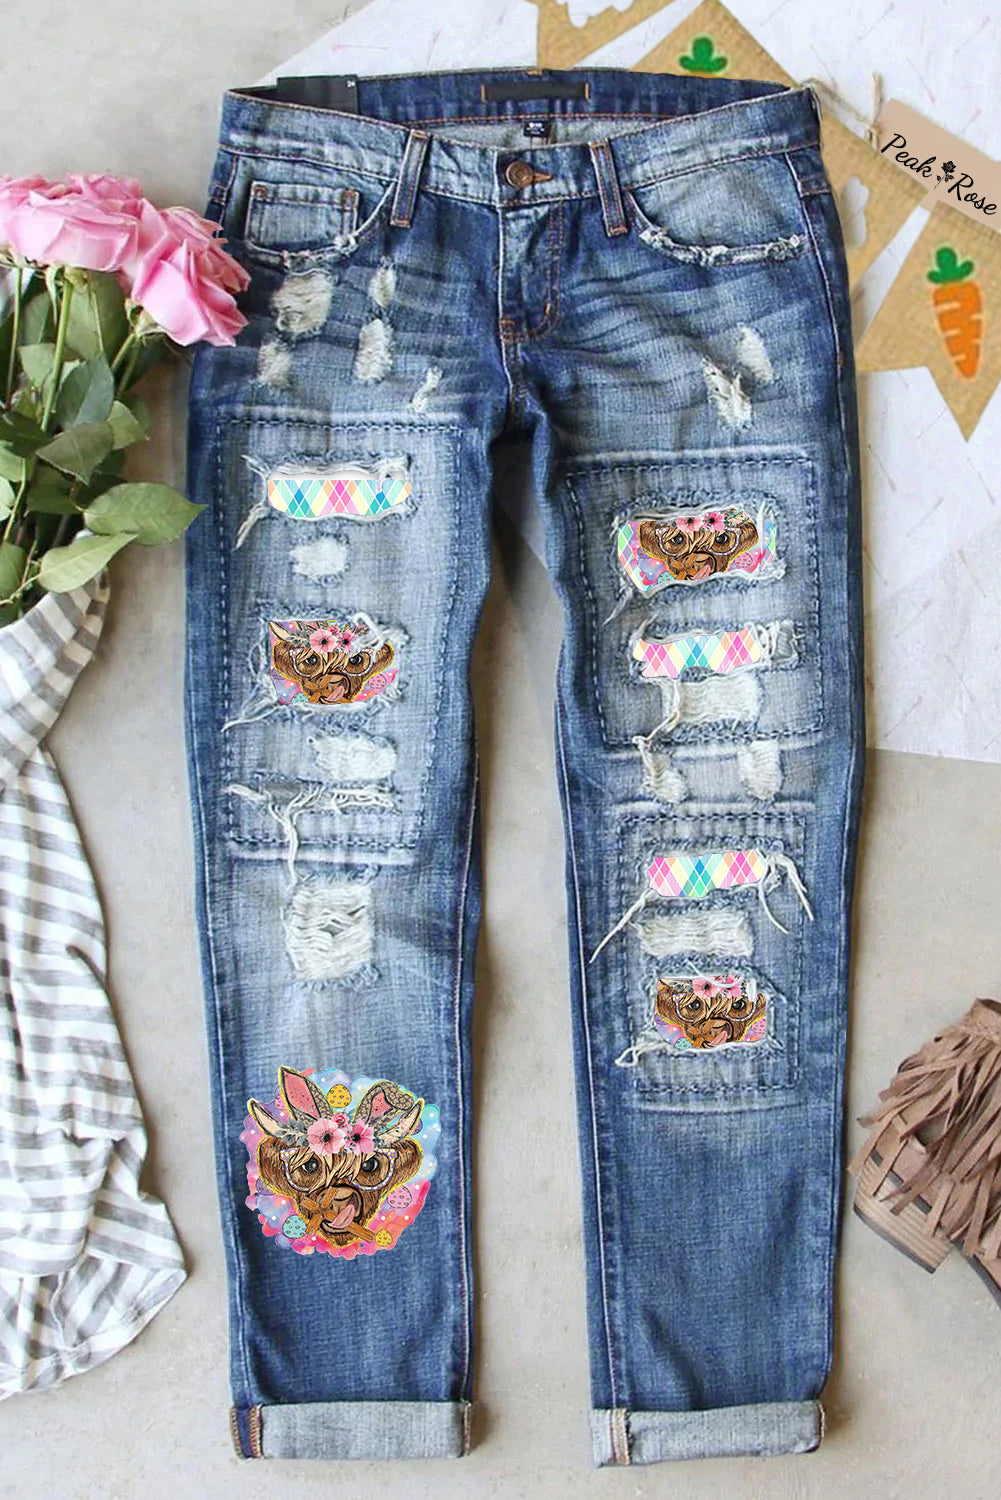 Easter Bunny Highland Cow With Glasses Farmers Cross Macarons Plaid Print Ripped Denim Jeans